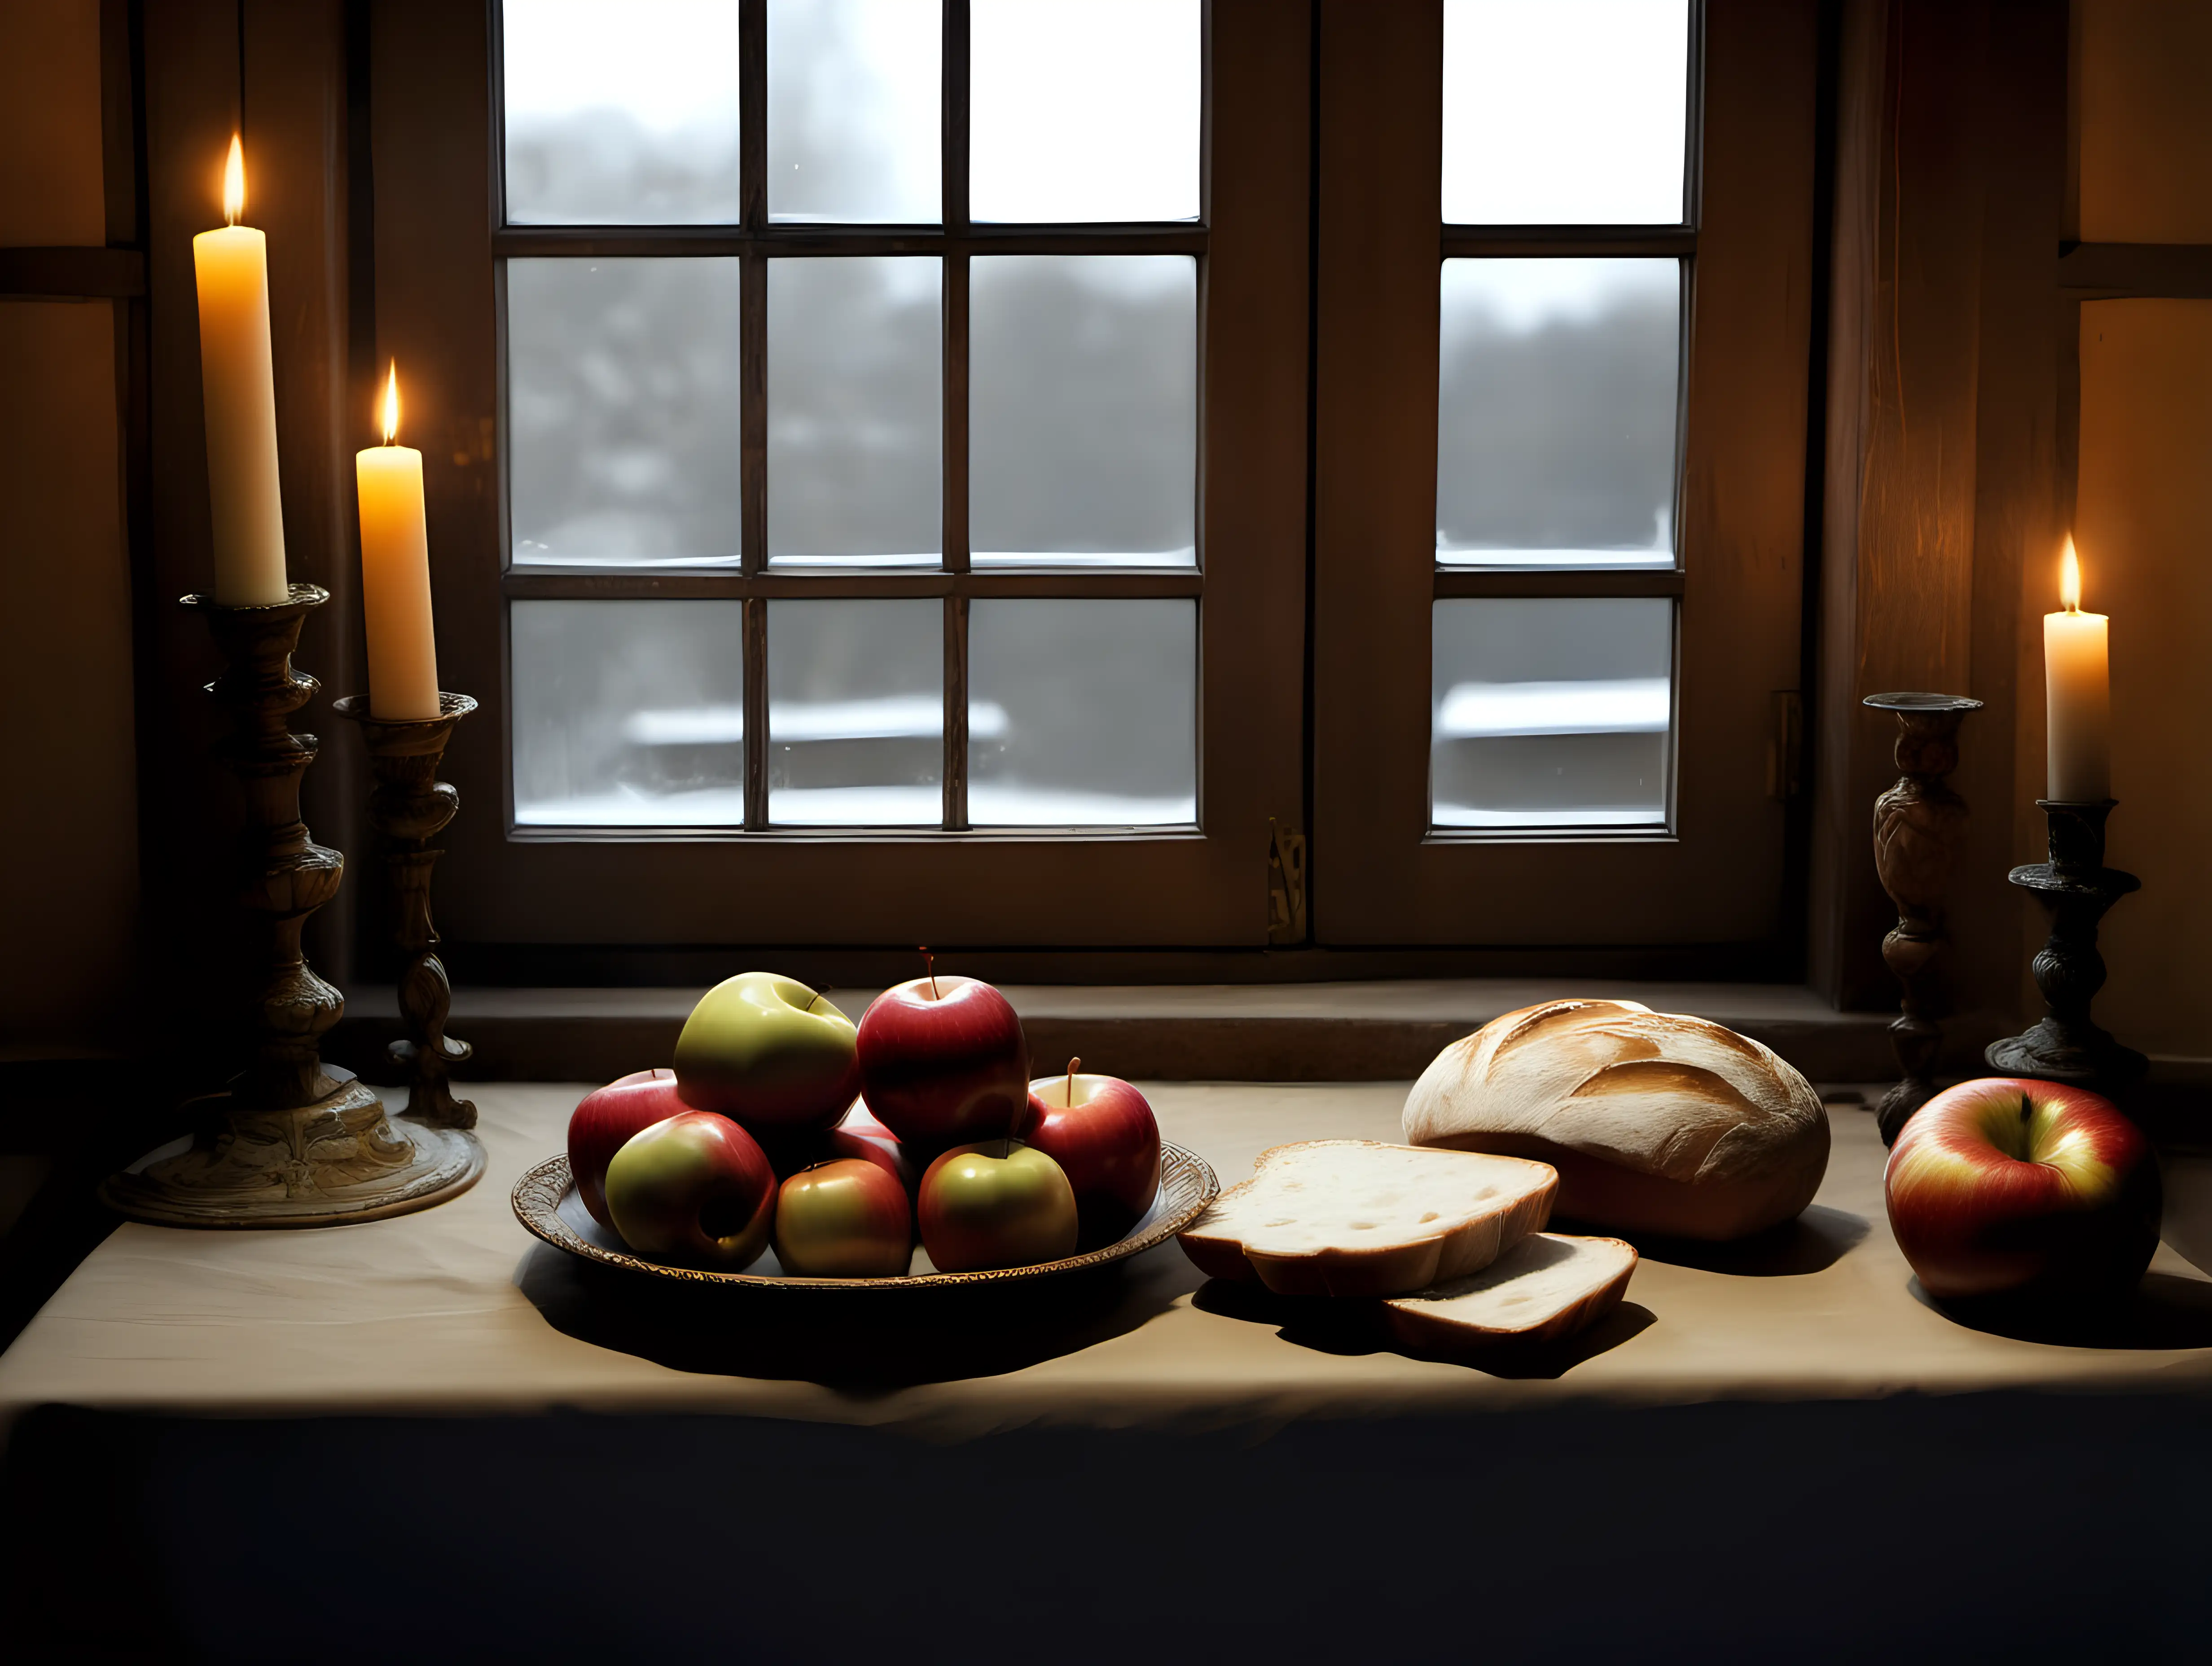 Style of XVII century, still life. table by a window, bread, candle, apple.